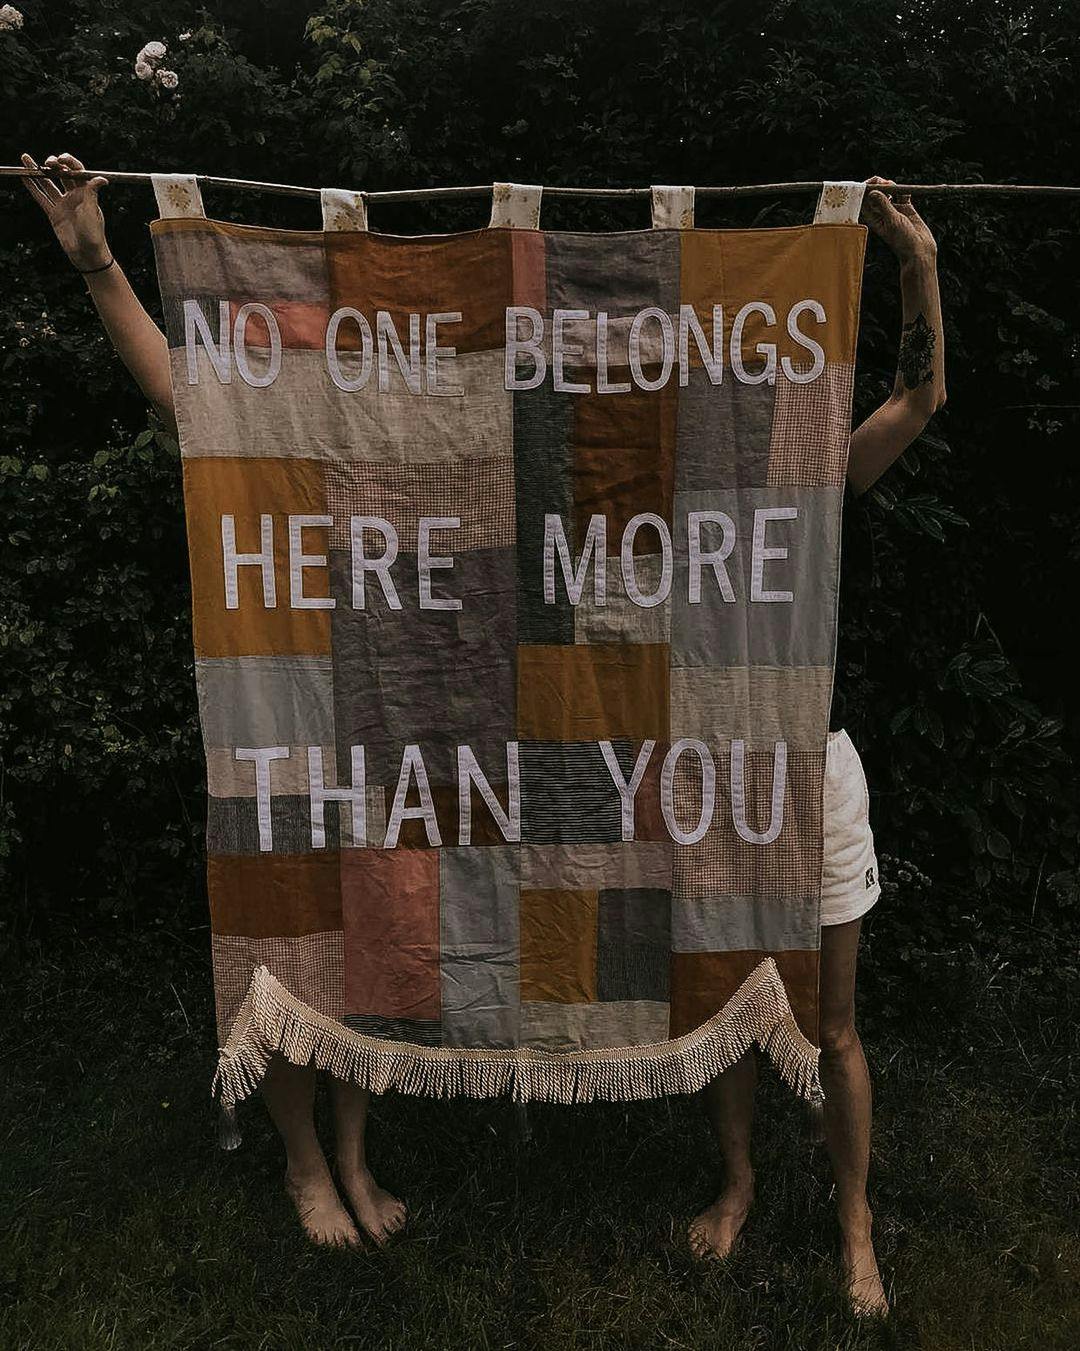 Quilt that says, "No one belongs here more than you"